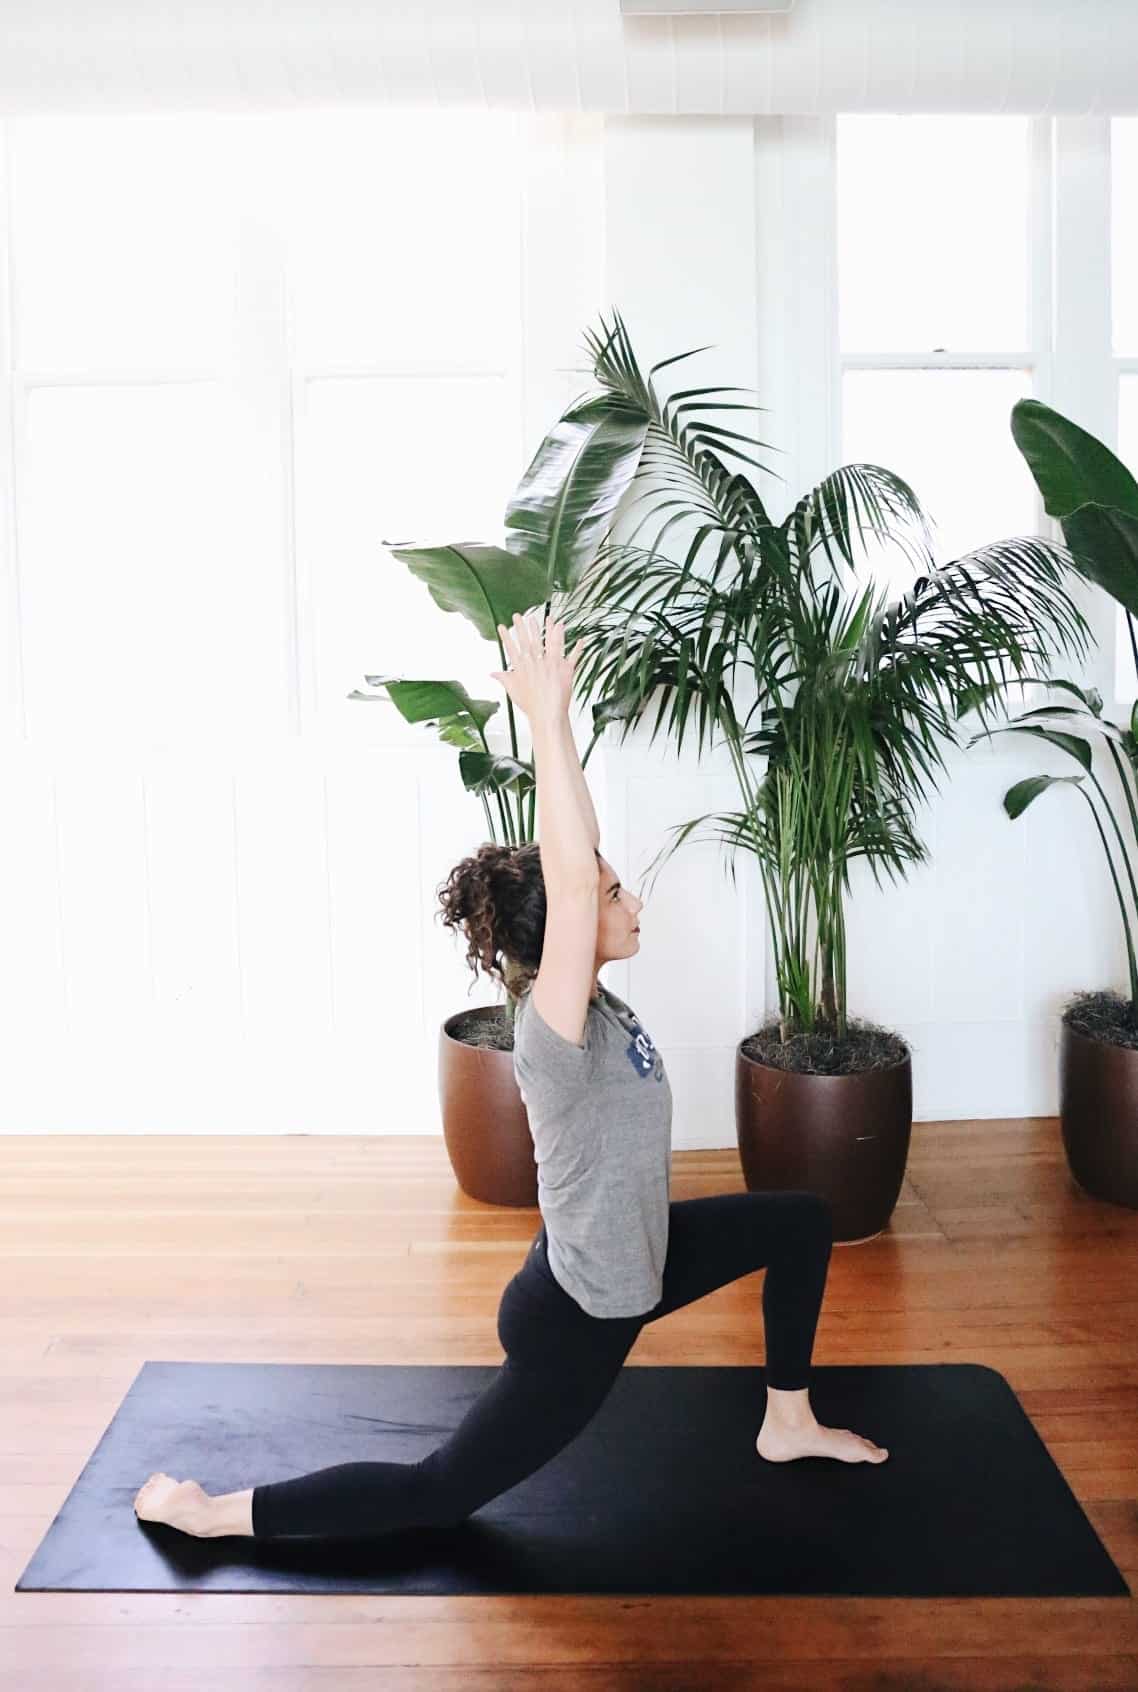 Feeling stressed-out and overwhelmed? Try yoga for stress relief! Here are 8 yoga poses to relieve your stress, allow you to feel more grounded and tackle life with energy and compassion. #stressrelief #yogaforstress